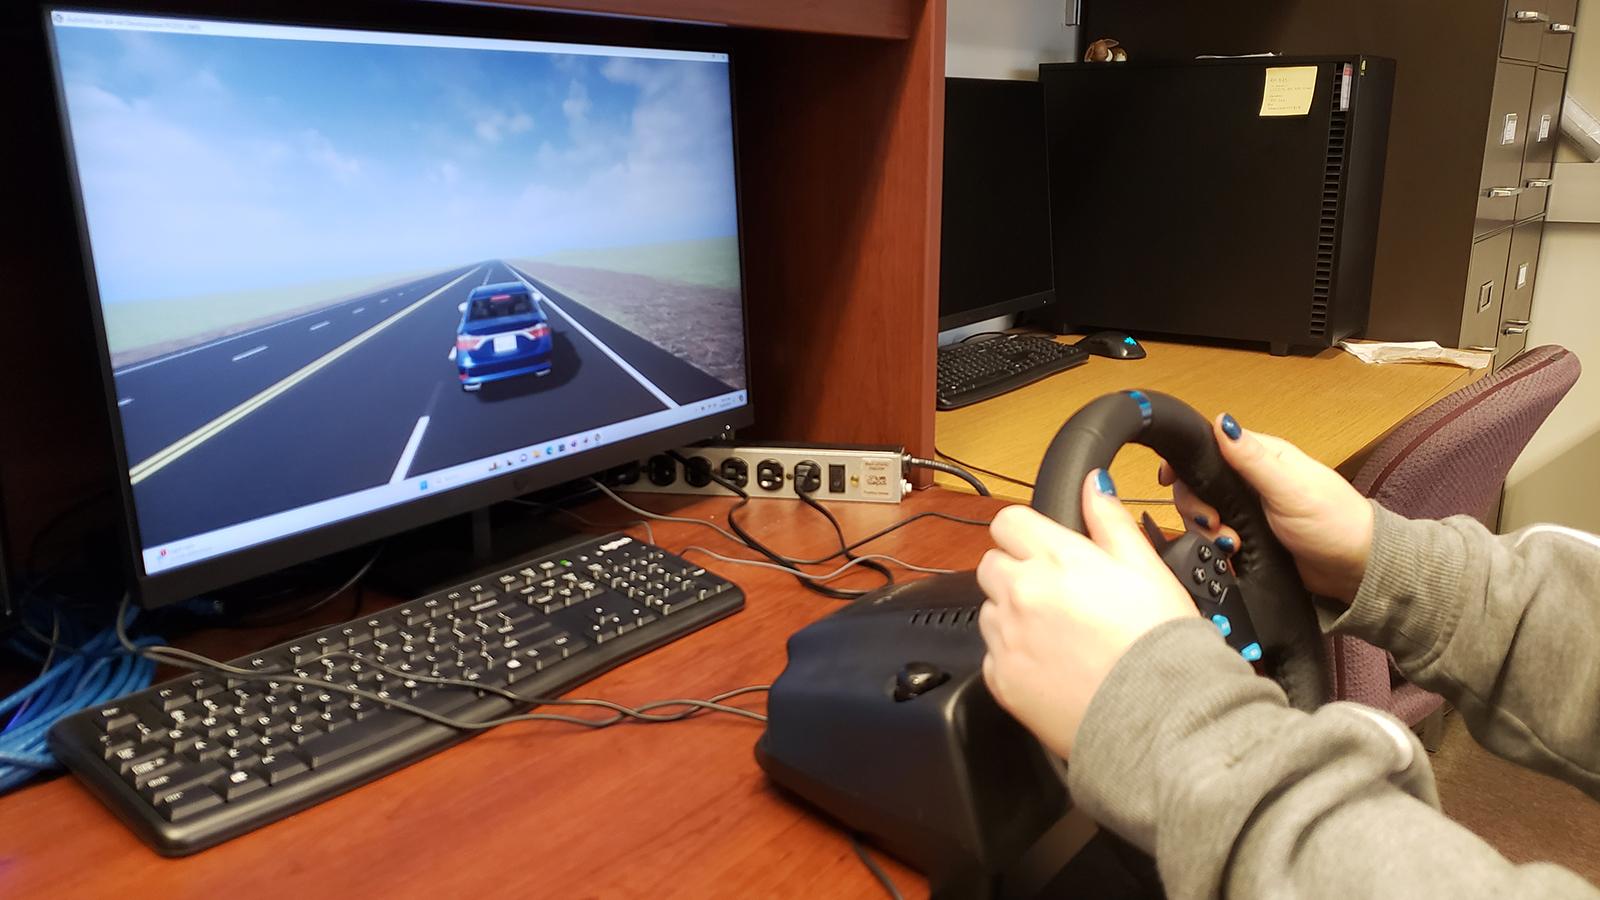 Computer screen showing car next to hands holding a steering wheel